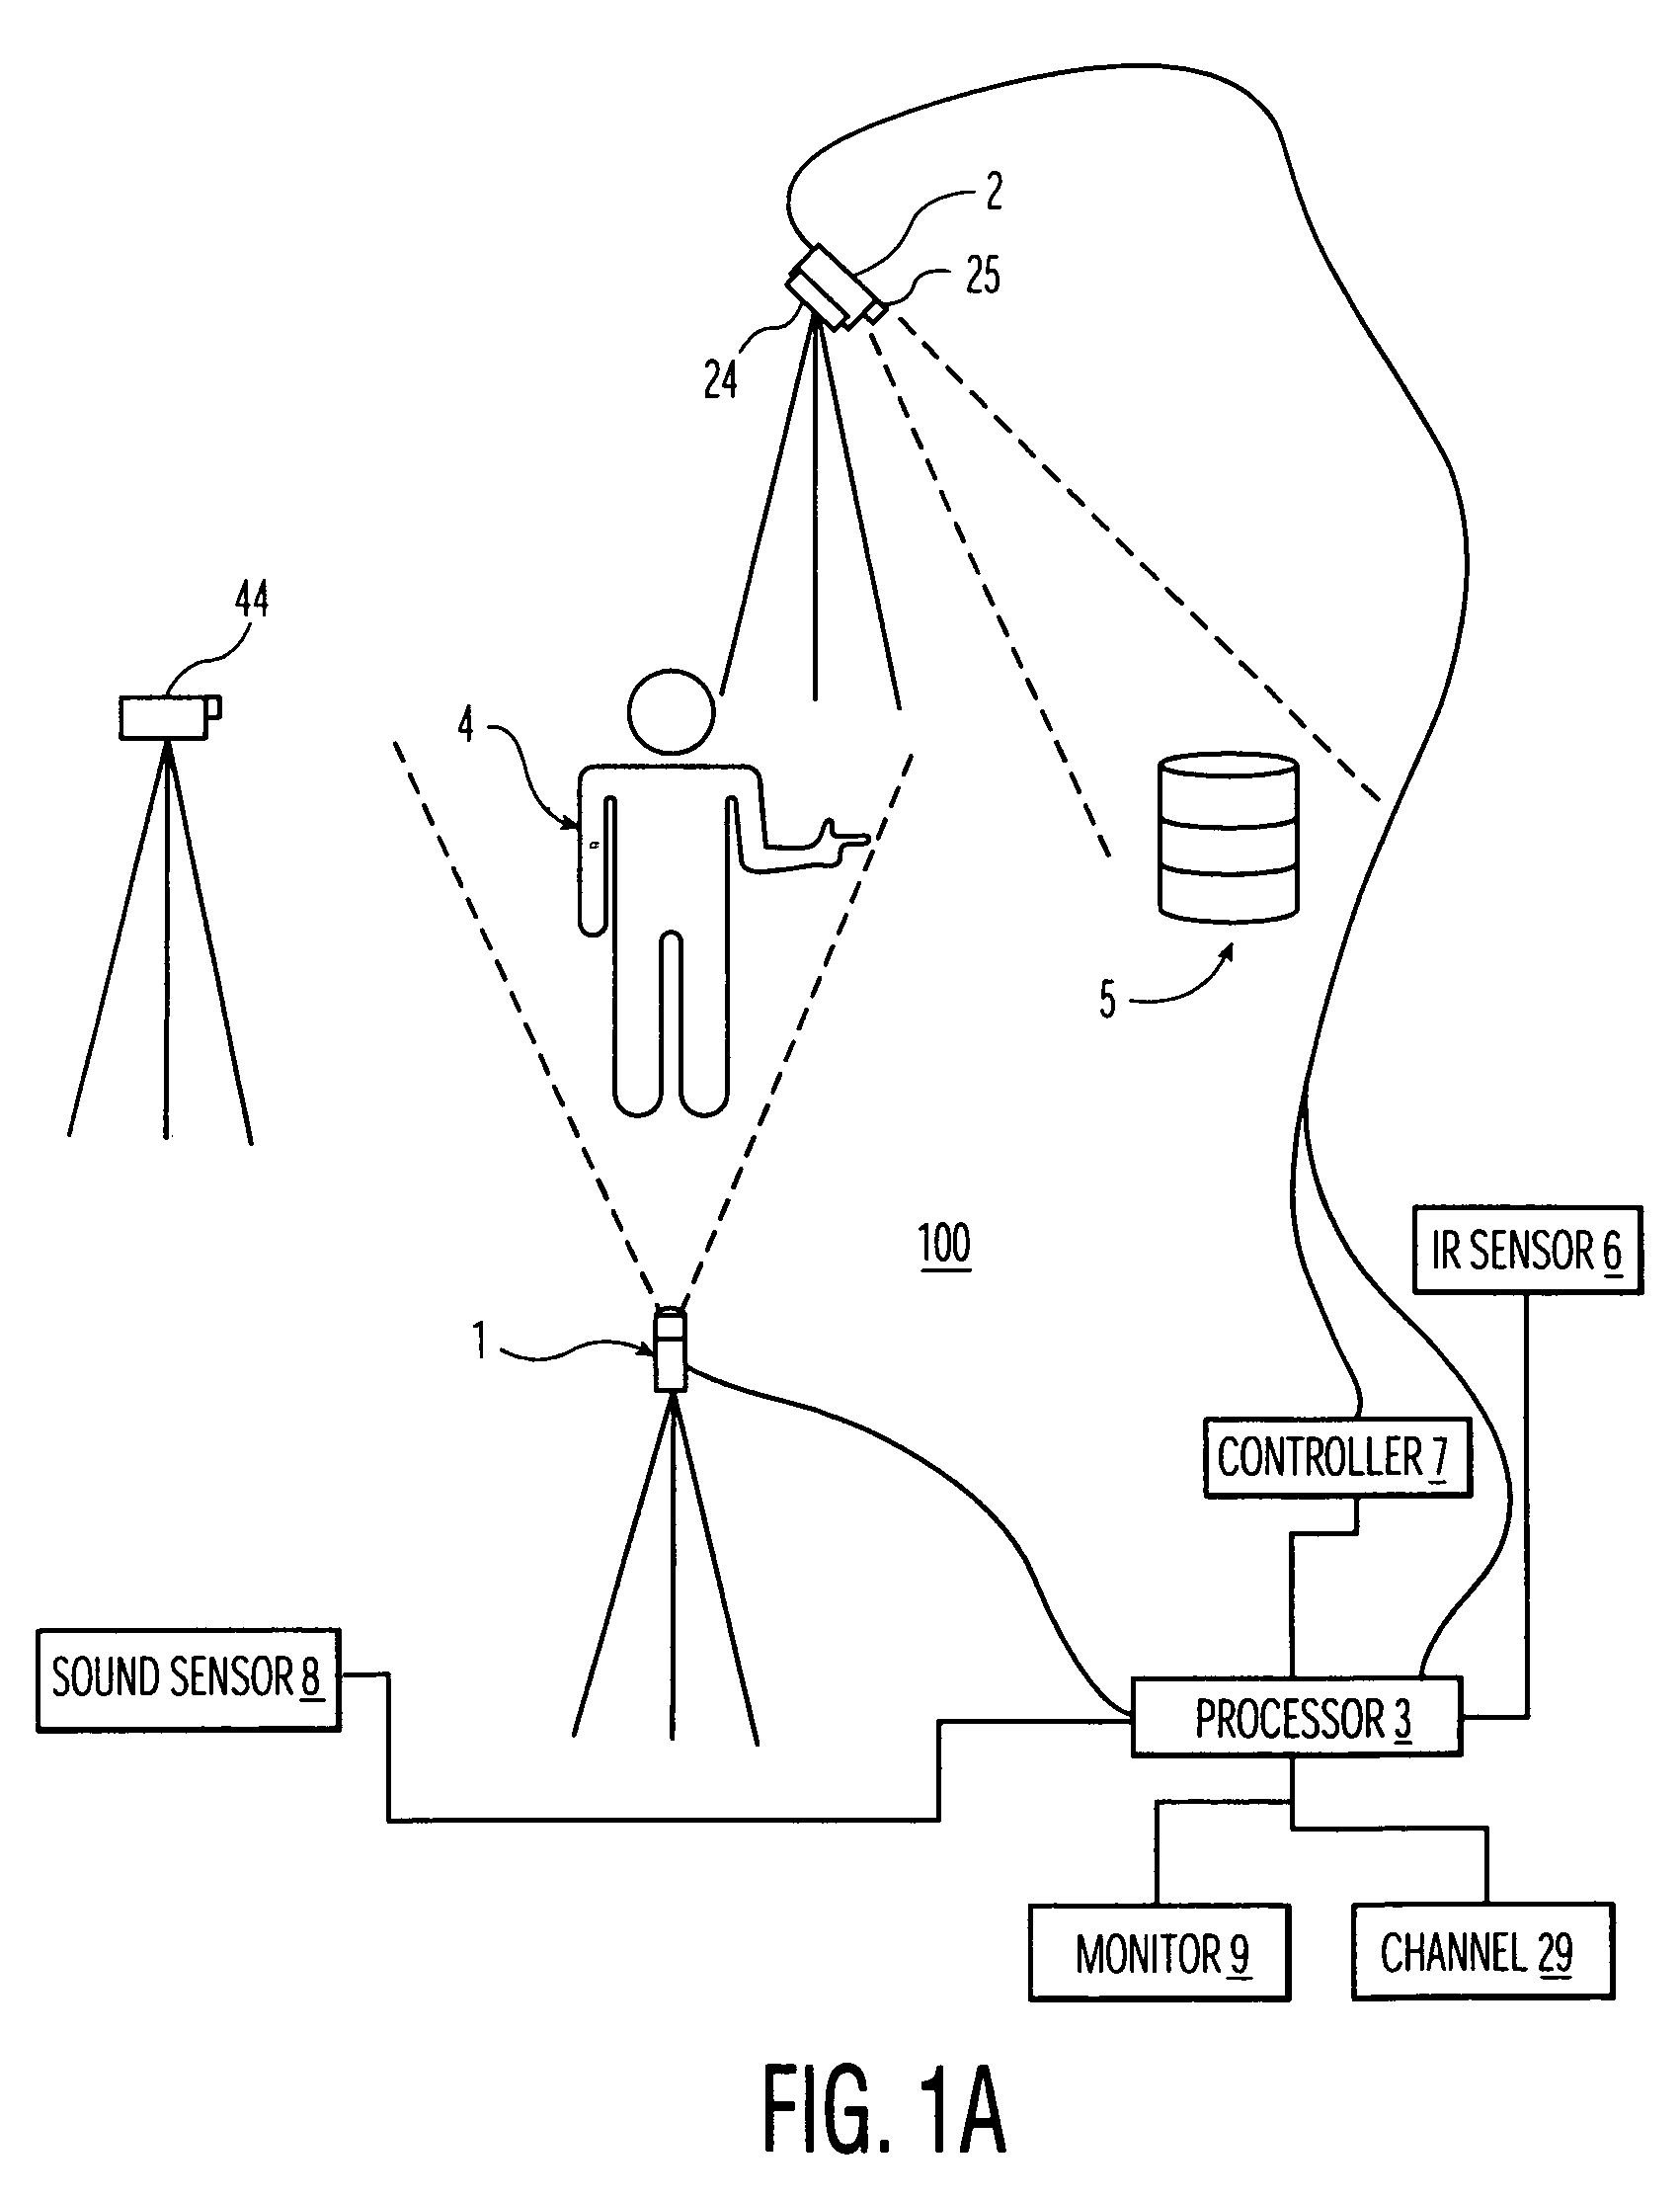 Multi-modal video target acquisition and re-direction system and method